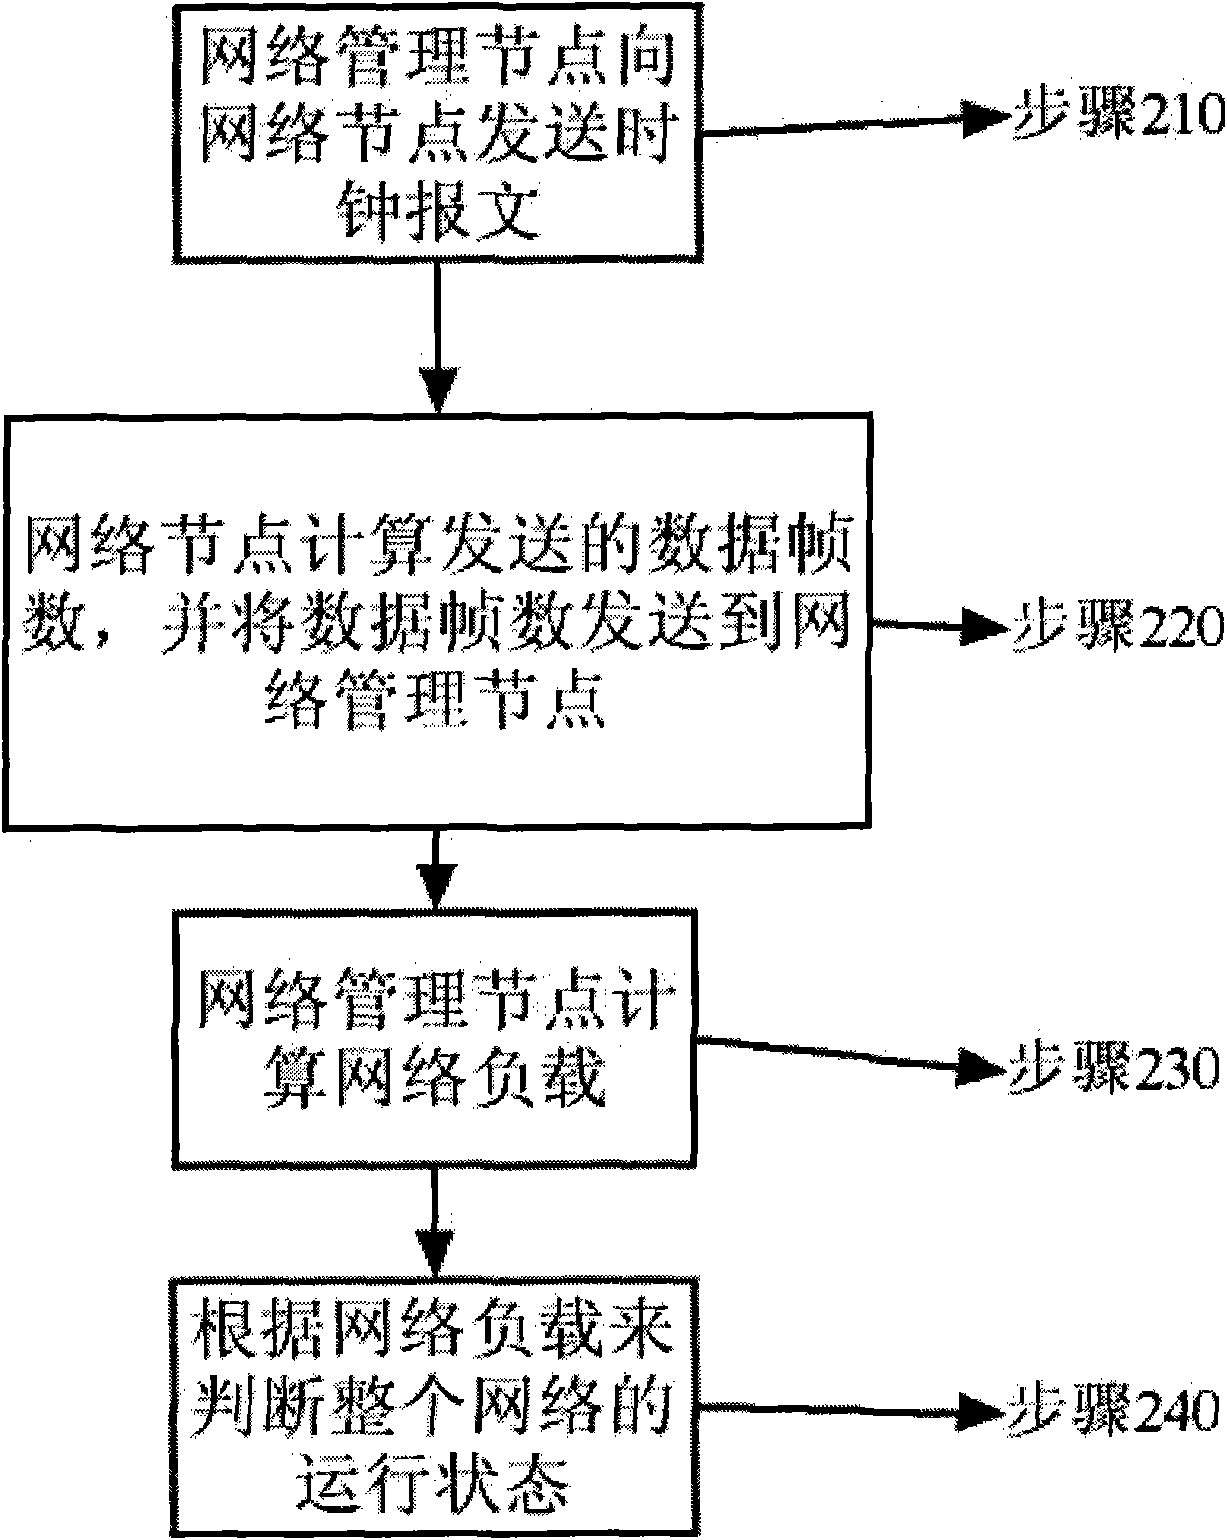 Method for monitoring operation state of overall network in network structure of control area network